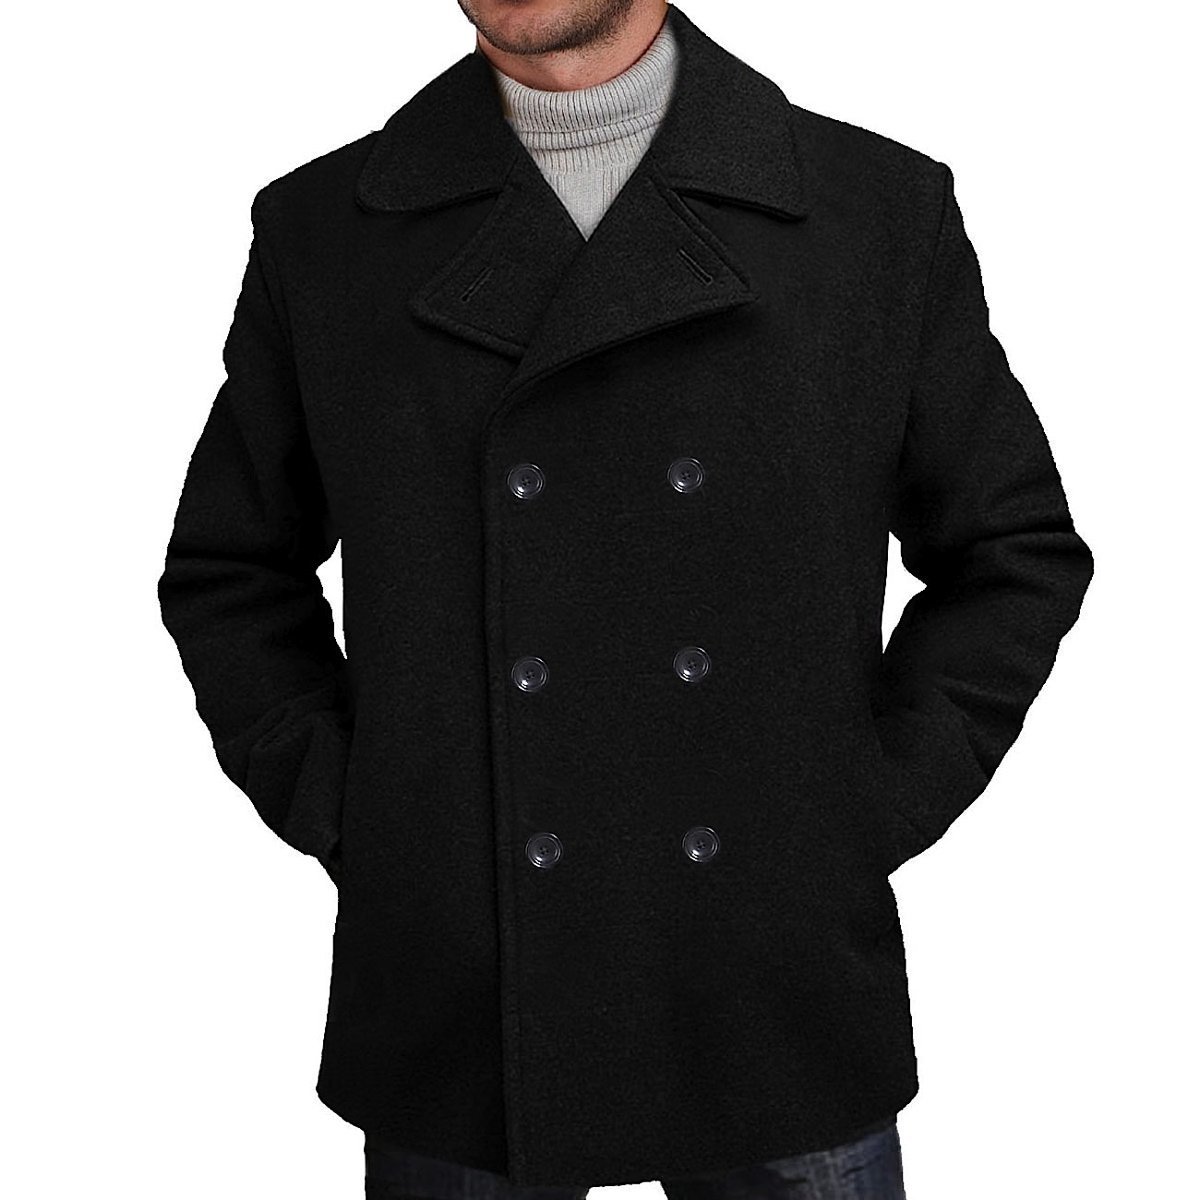 Mens Double Breasted Wool Overcoat Fur Collar Winter